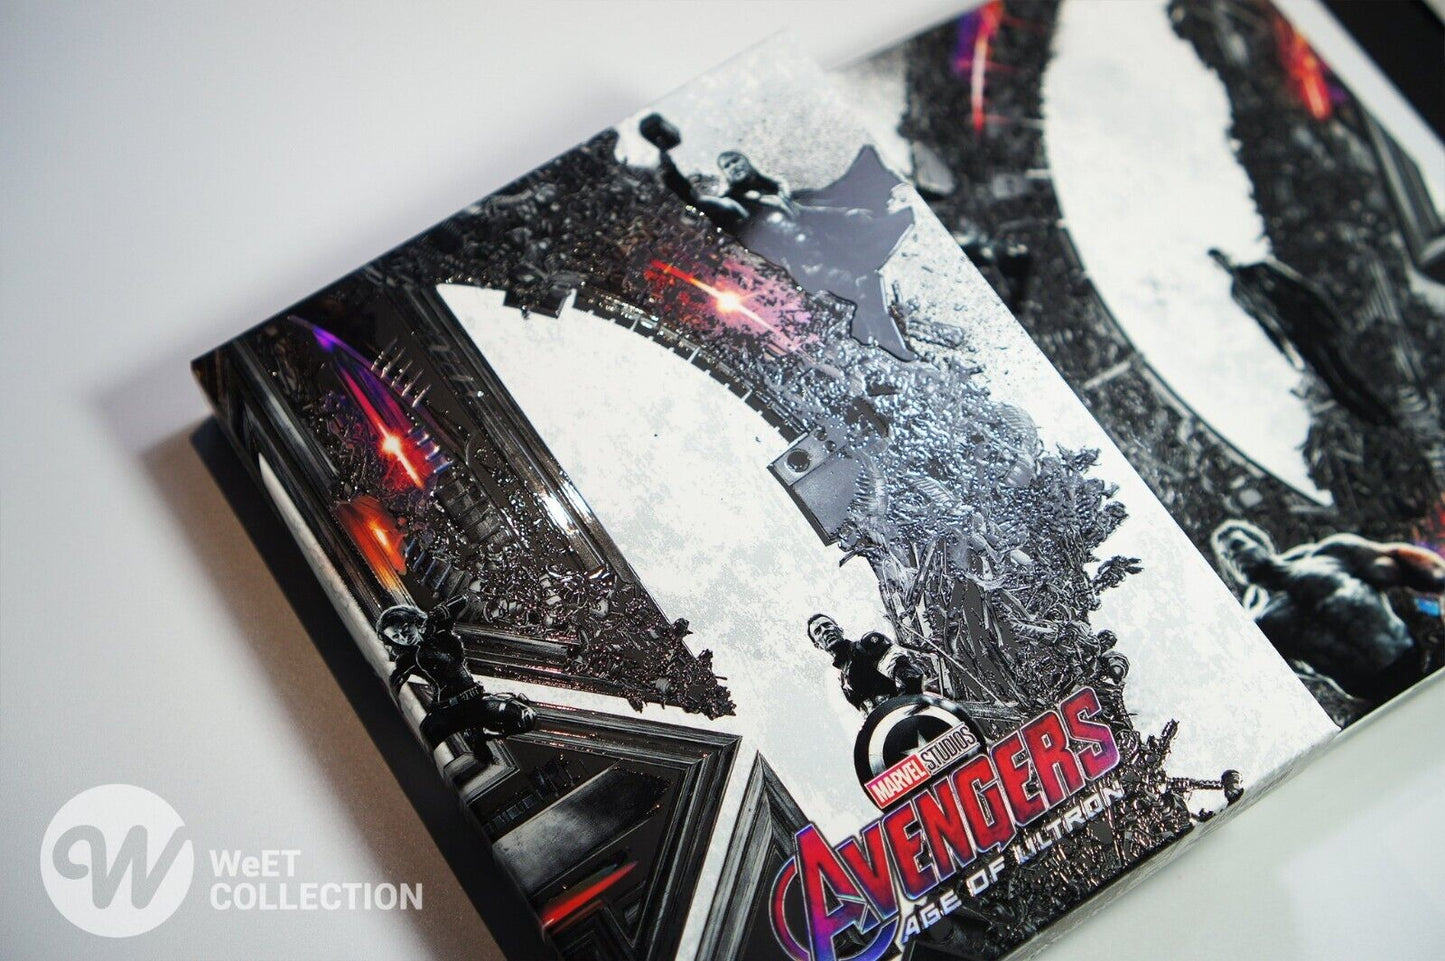 Avengers: Age of Ultron 4K+2D+3D Blu-ray SteelBook WeET Collection Exclusive #15 Full Slip A1